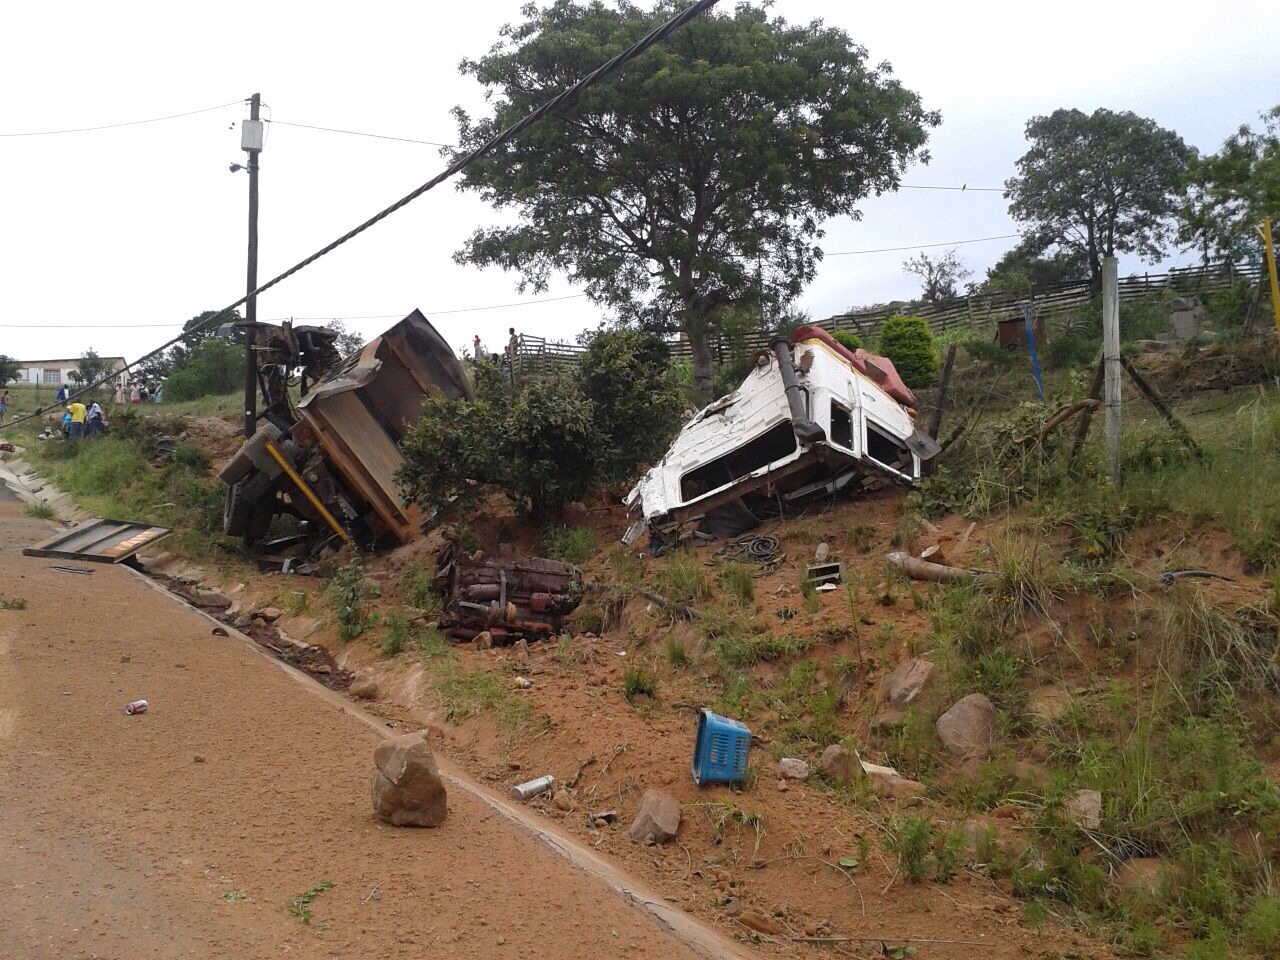 One dead and another injured in truck roll over in Molweni